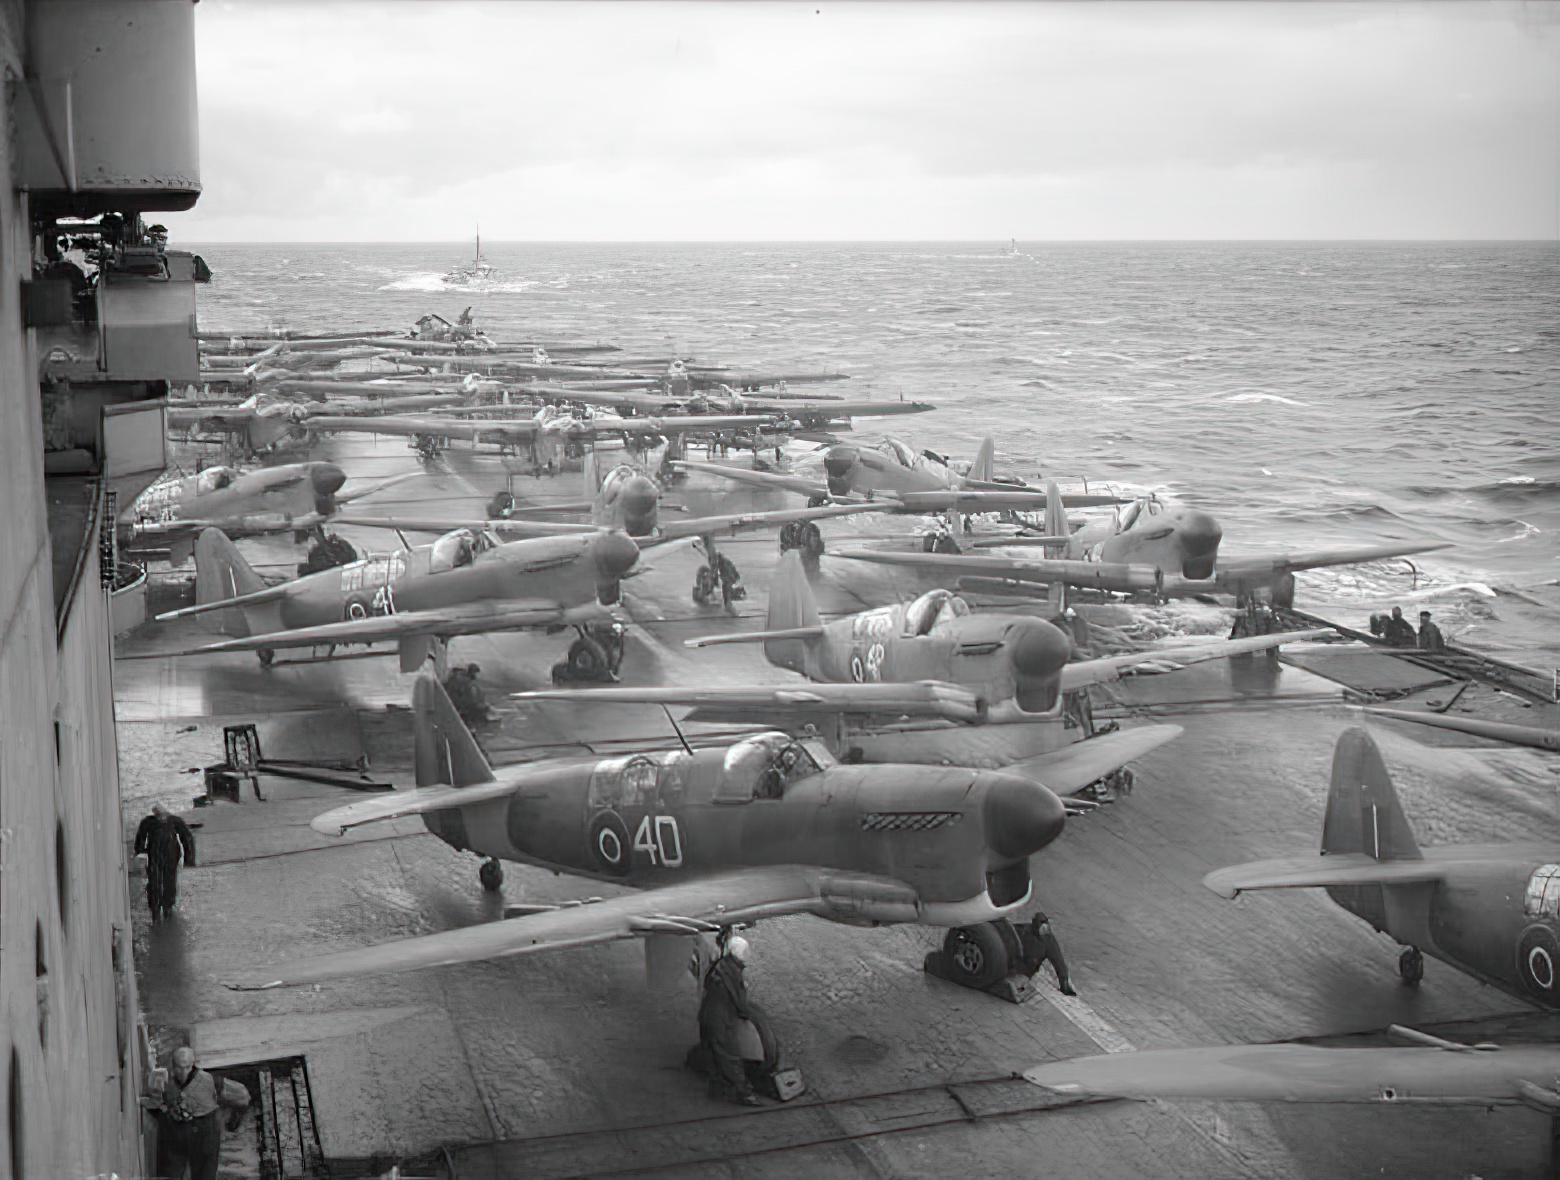  Fairey Fireflies (1771 Squadron), Fairey Barracudas (828 Squadron), and Supermarine Seafires (880 Squadron) of the Fleet Air Arm on the flight deck of HMS Implacable (R86) warming up ready to make strike on enemy shipping at the entrance to Alten Fjord, Norway 1944